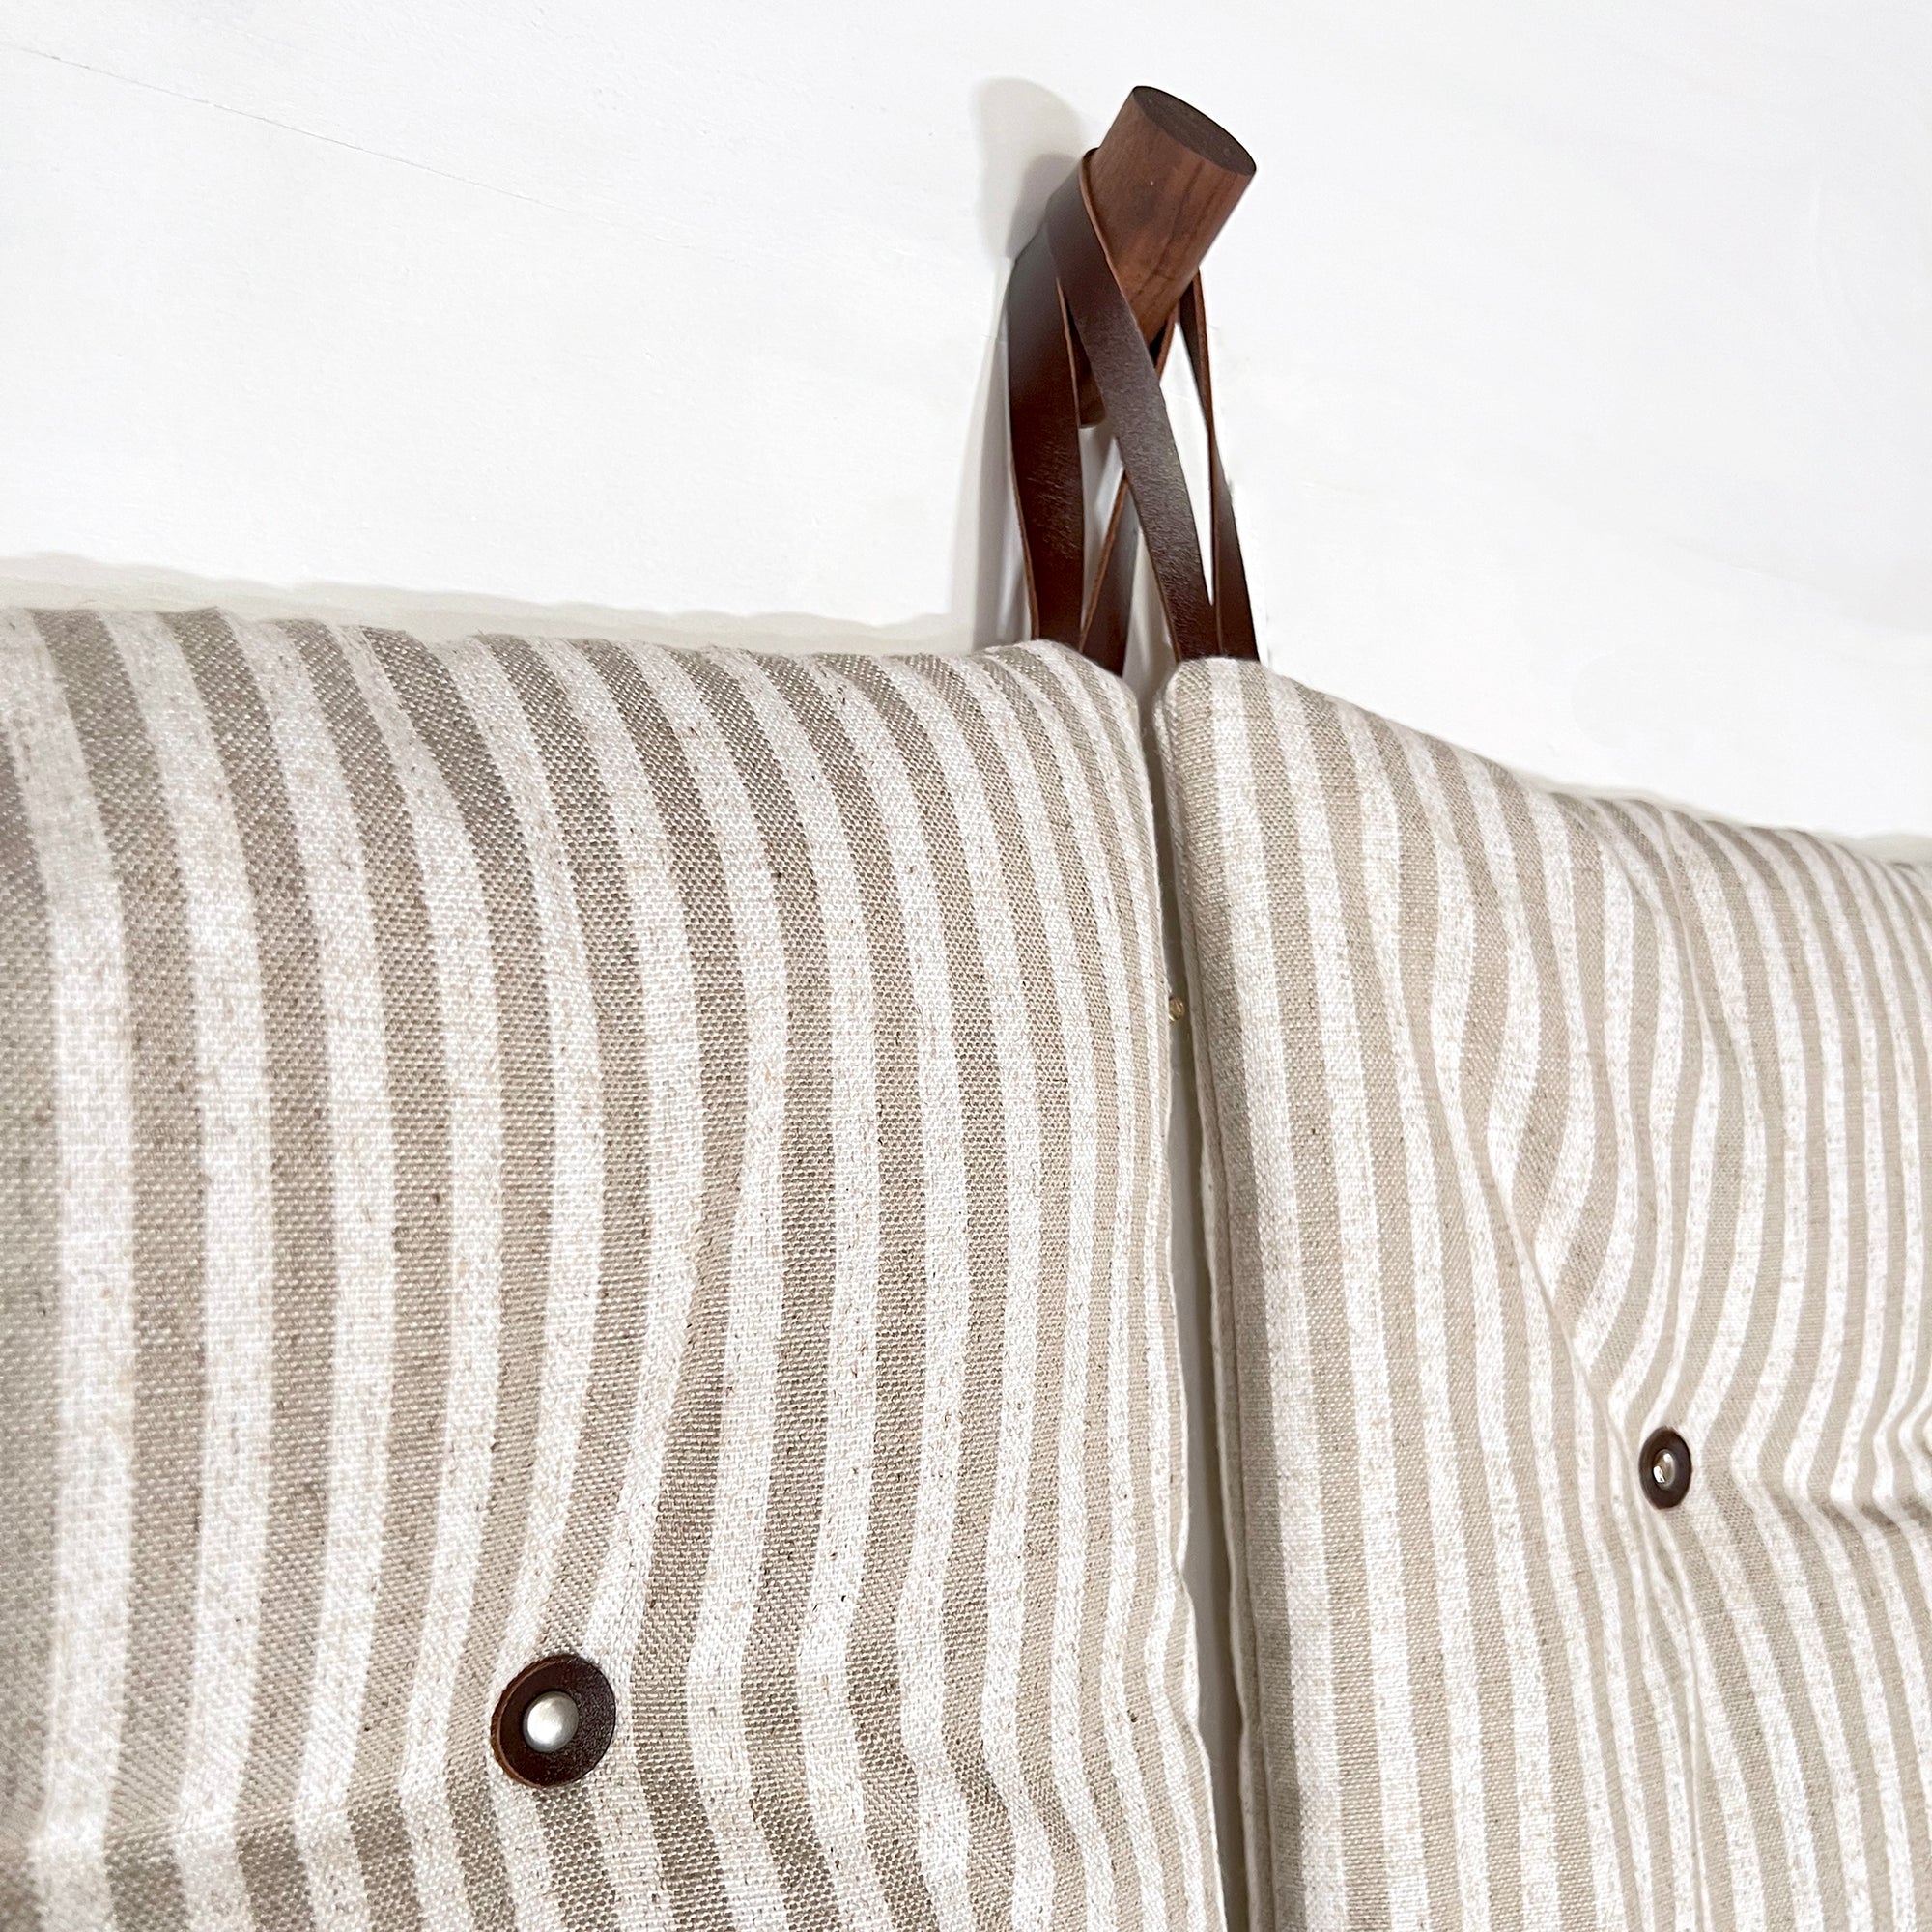 The Tuft Wall Cushion System - Sand Beige & Off White Striped Linen